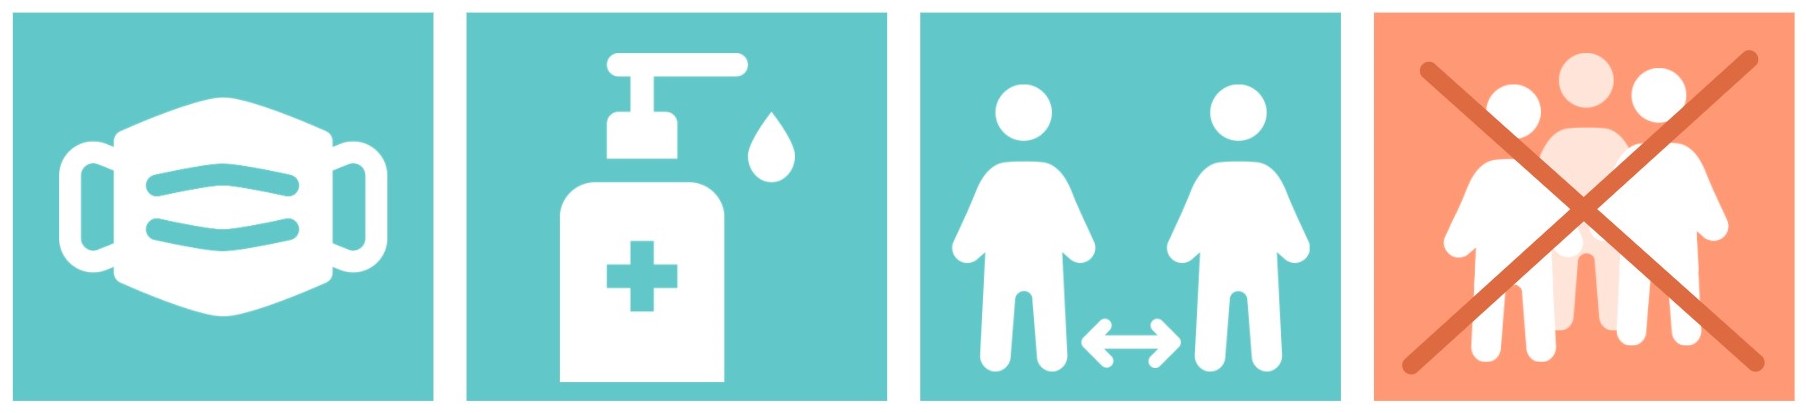 Icons representing what you should do during covid, mask, sanitize, distance